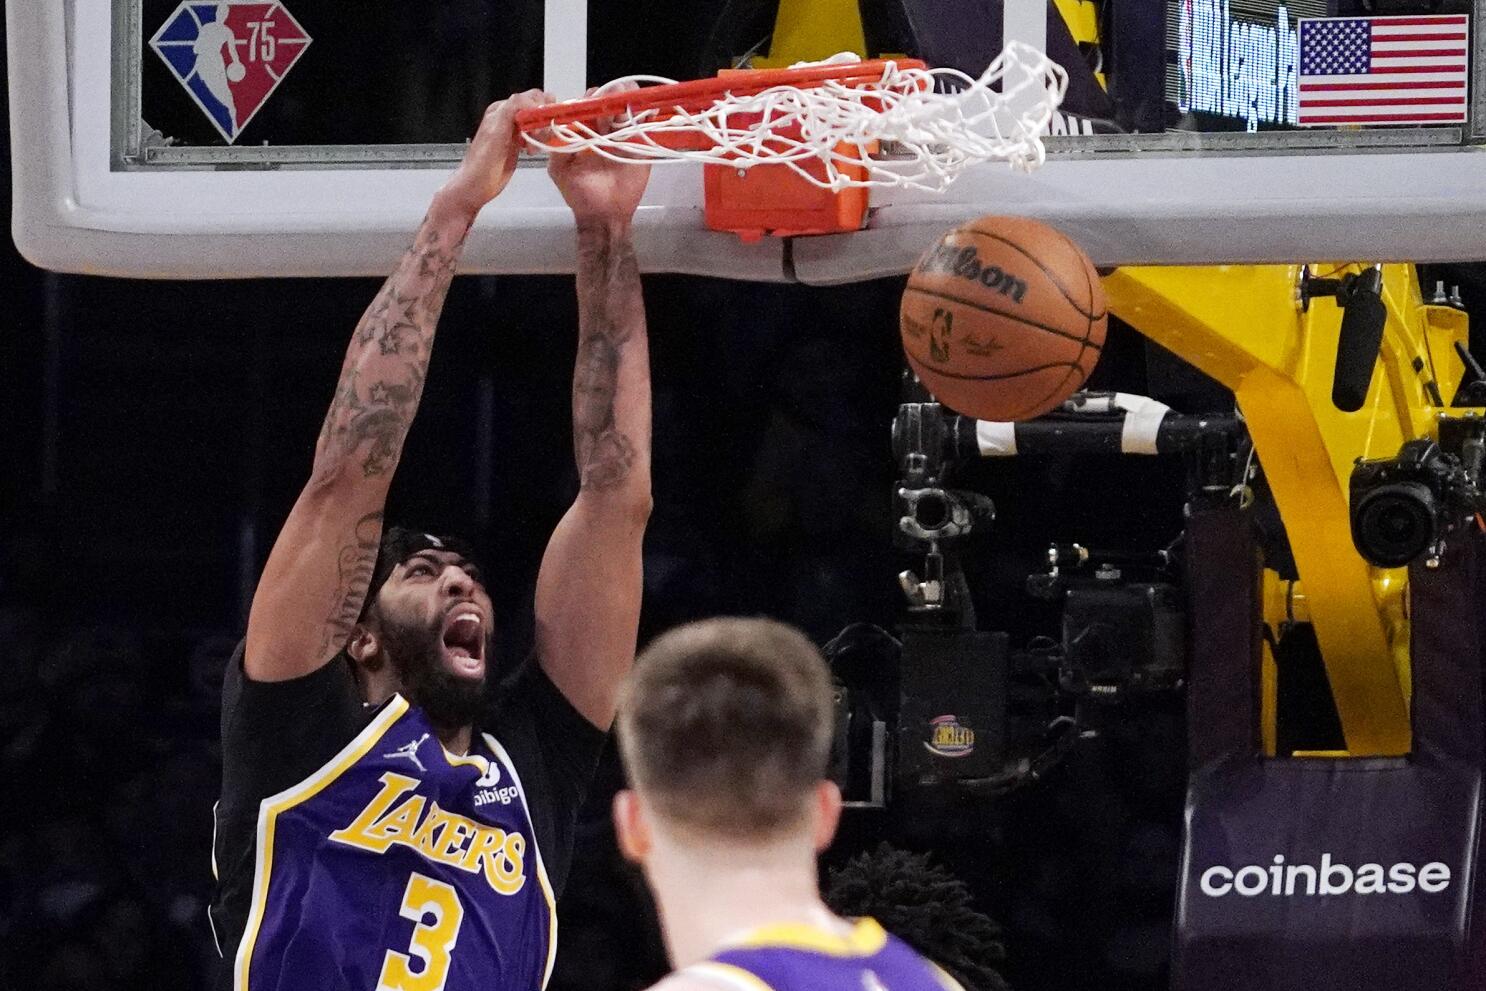 Lakers: Anthony Davis sprained foot, out at least 4 weeks